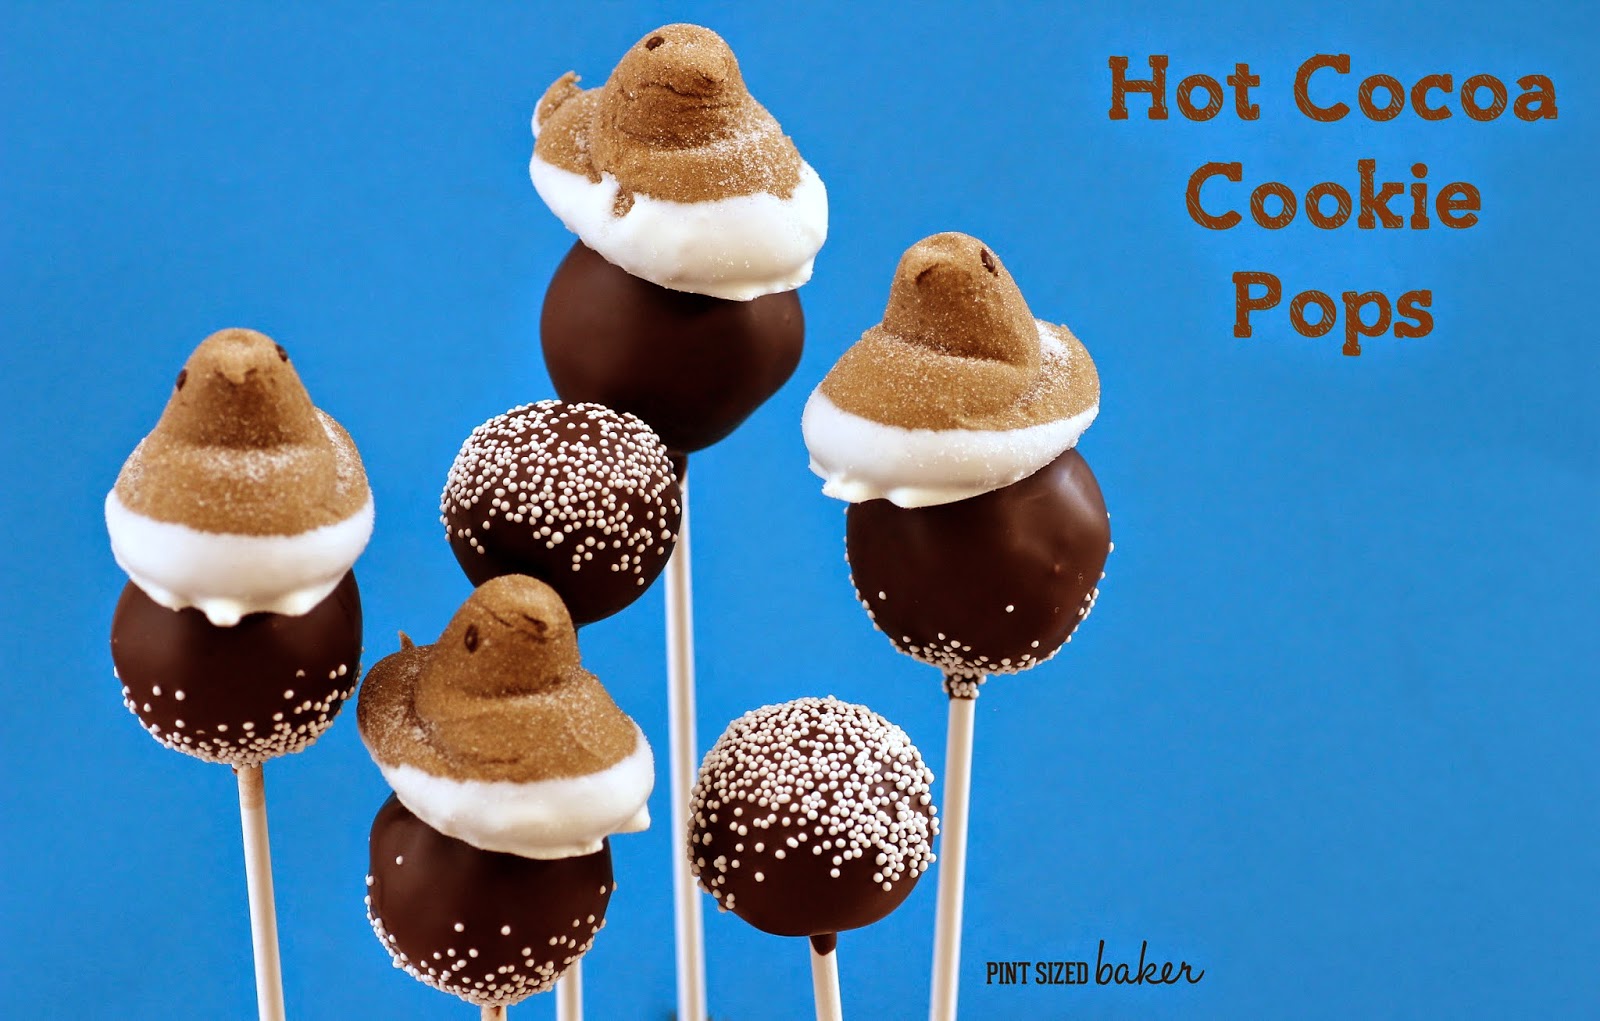 Make some Hot Cocoa Cookie Pops with the kids on the next snow day! Get the full tutorial on how to make them now!